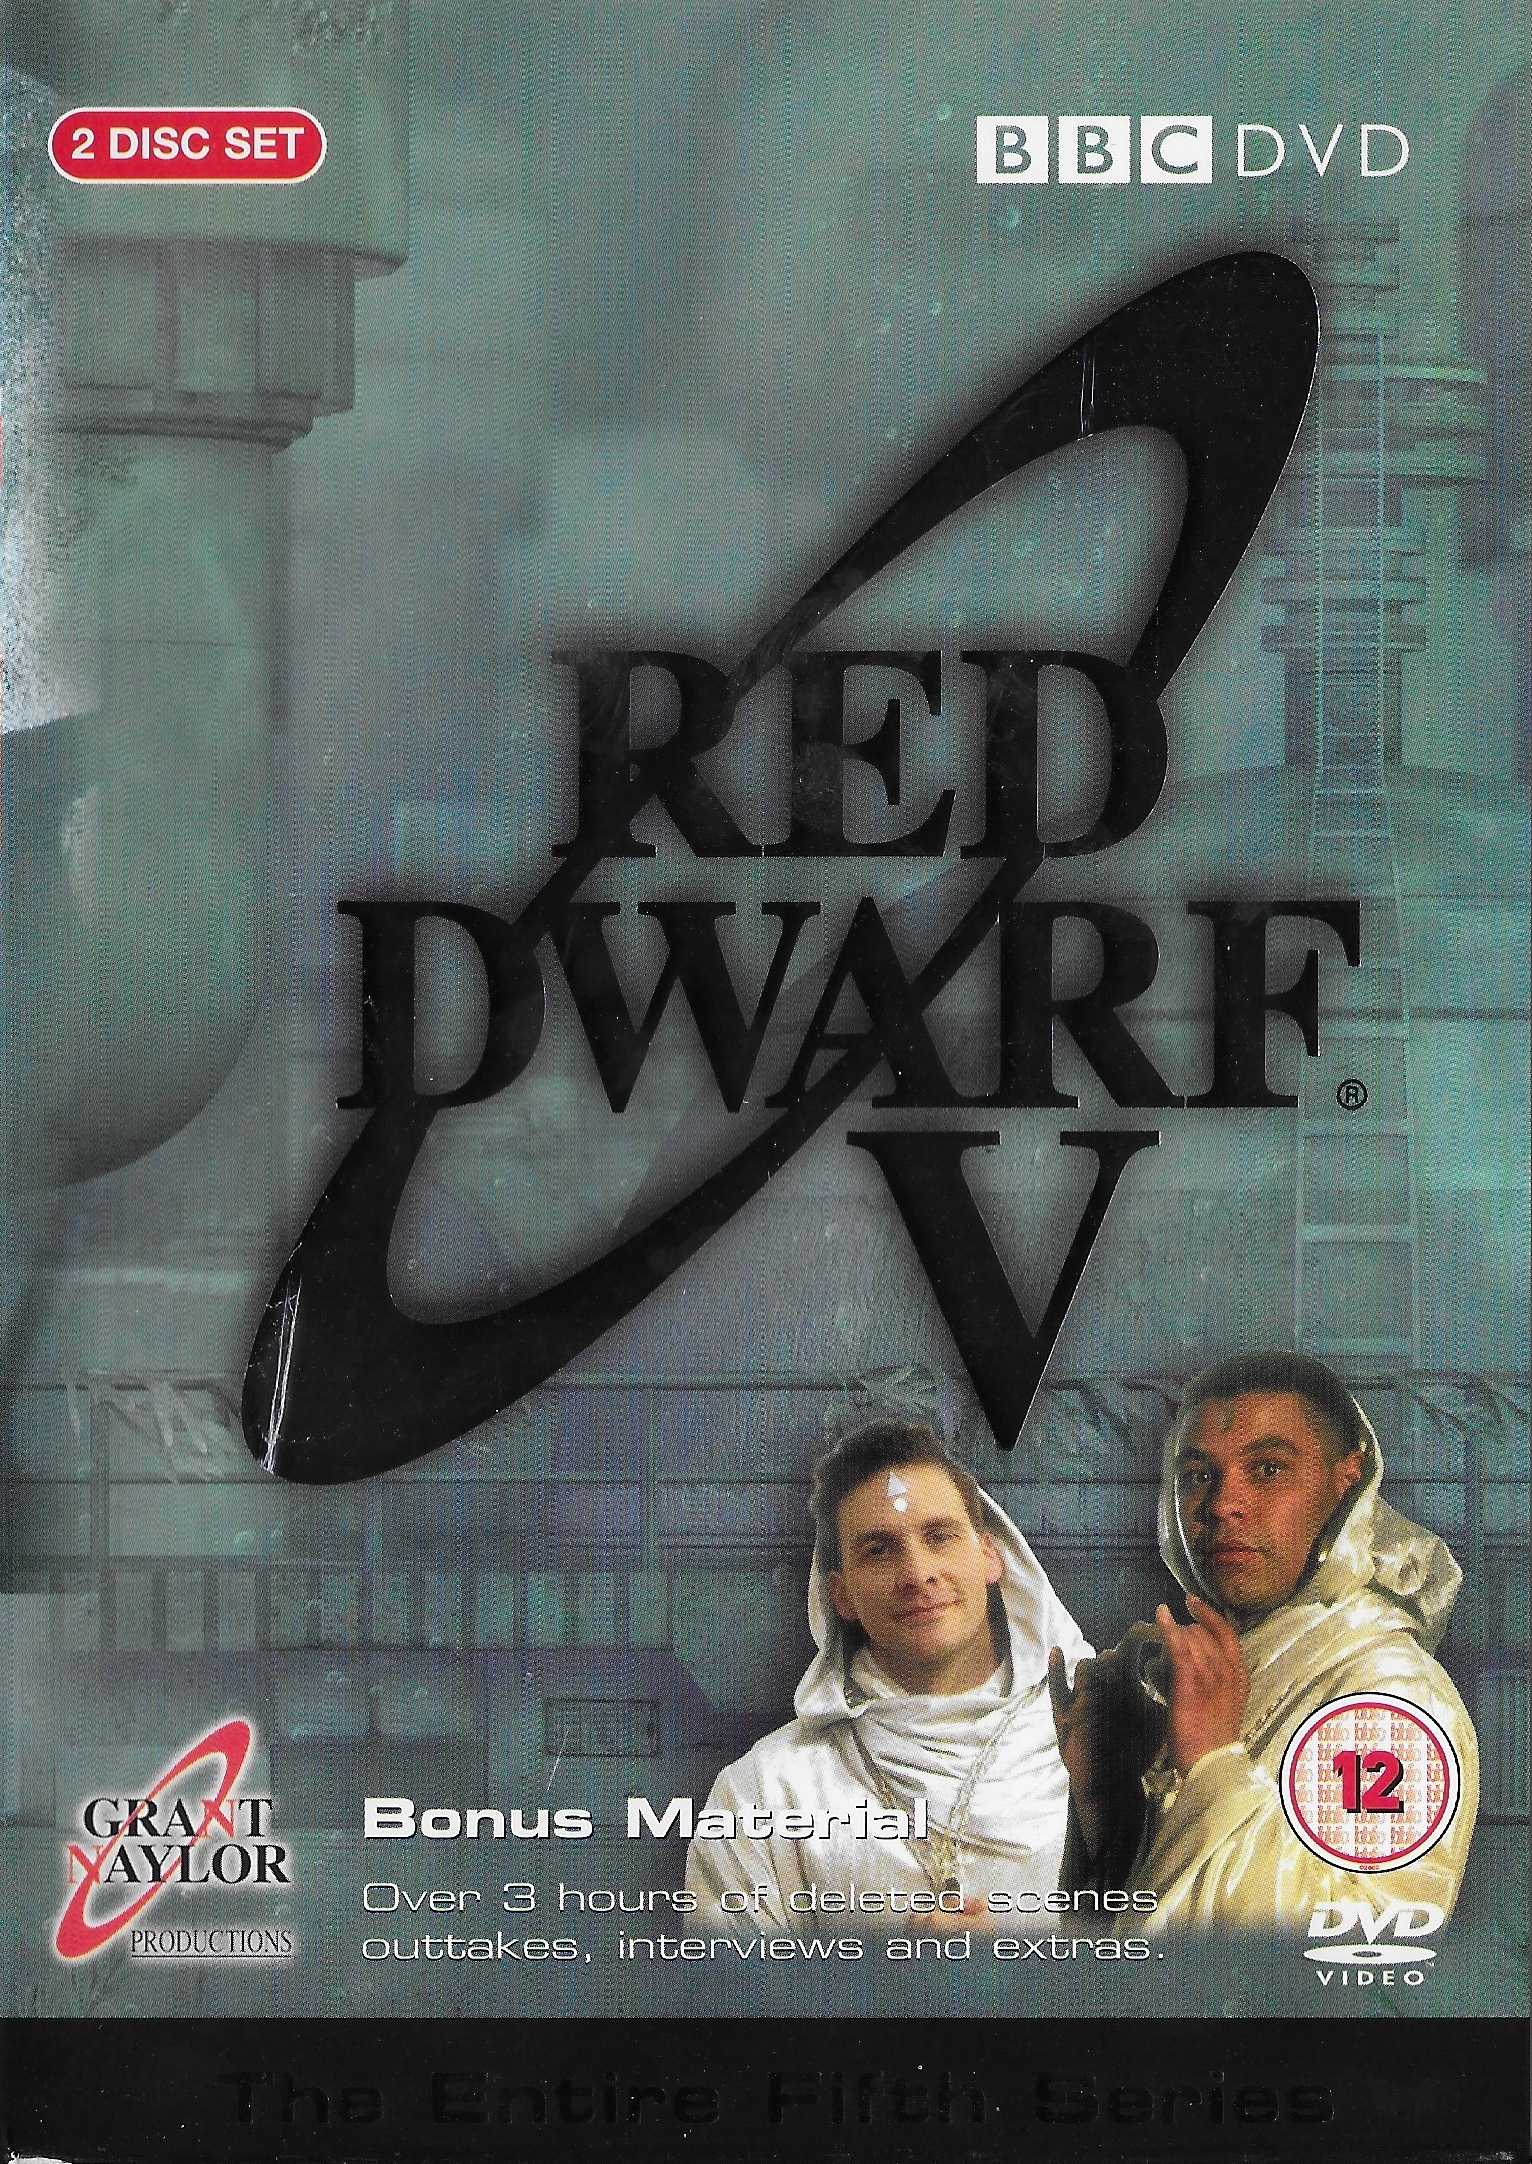 Picture of BBCDVD 1371 Red dwarf - Series V by artist Rob Grant / Doug Naylor from the BBC dvds - Records and Tapes library